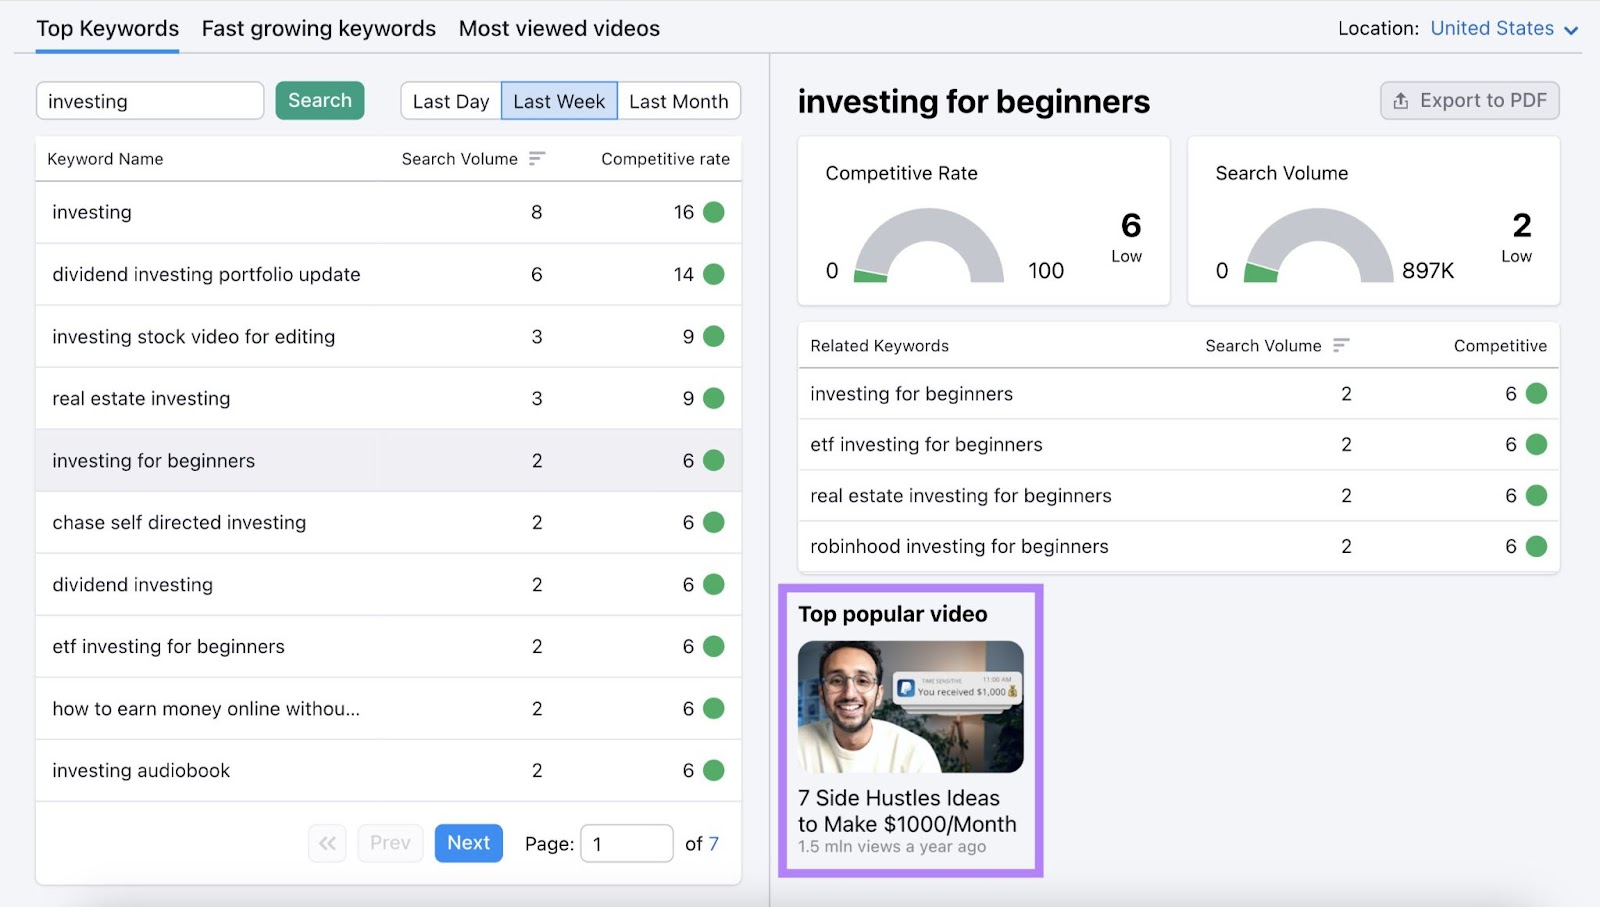 “Top popular video” section for "investing for beginners" keyword